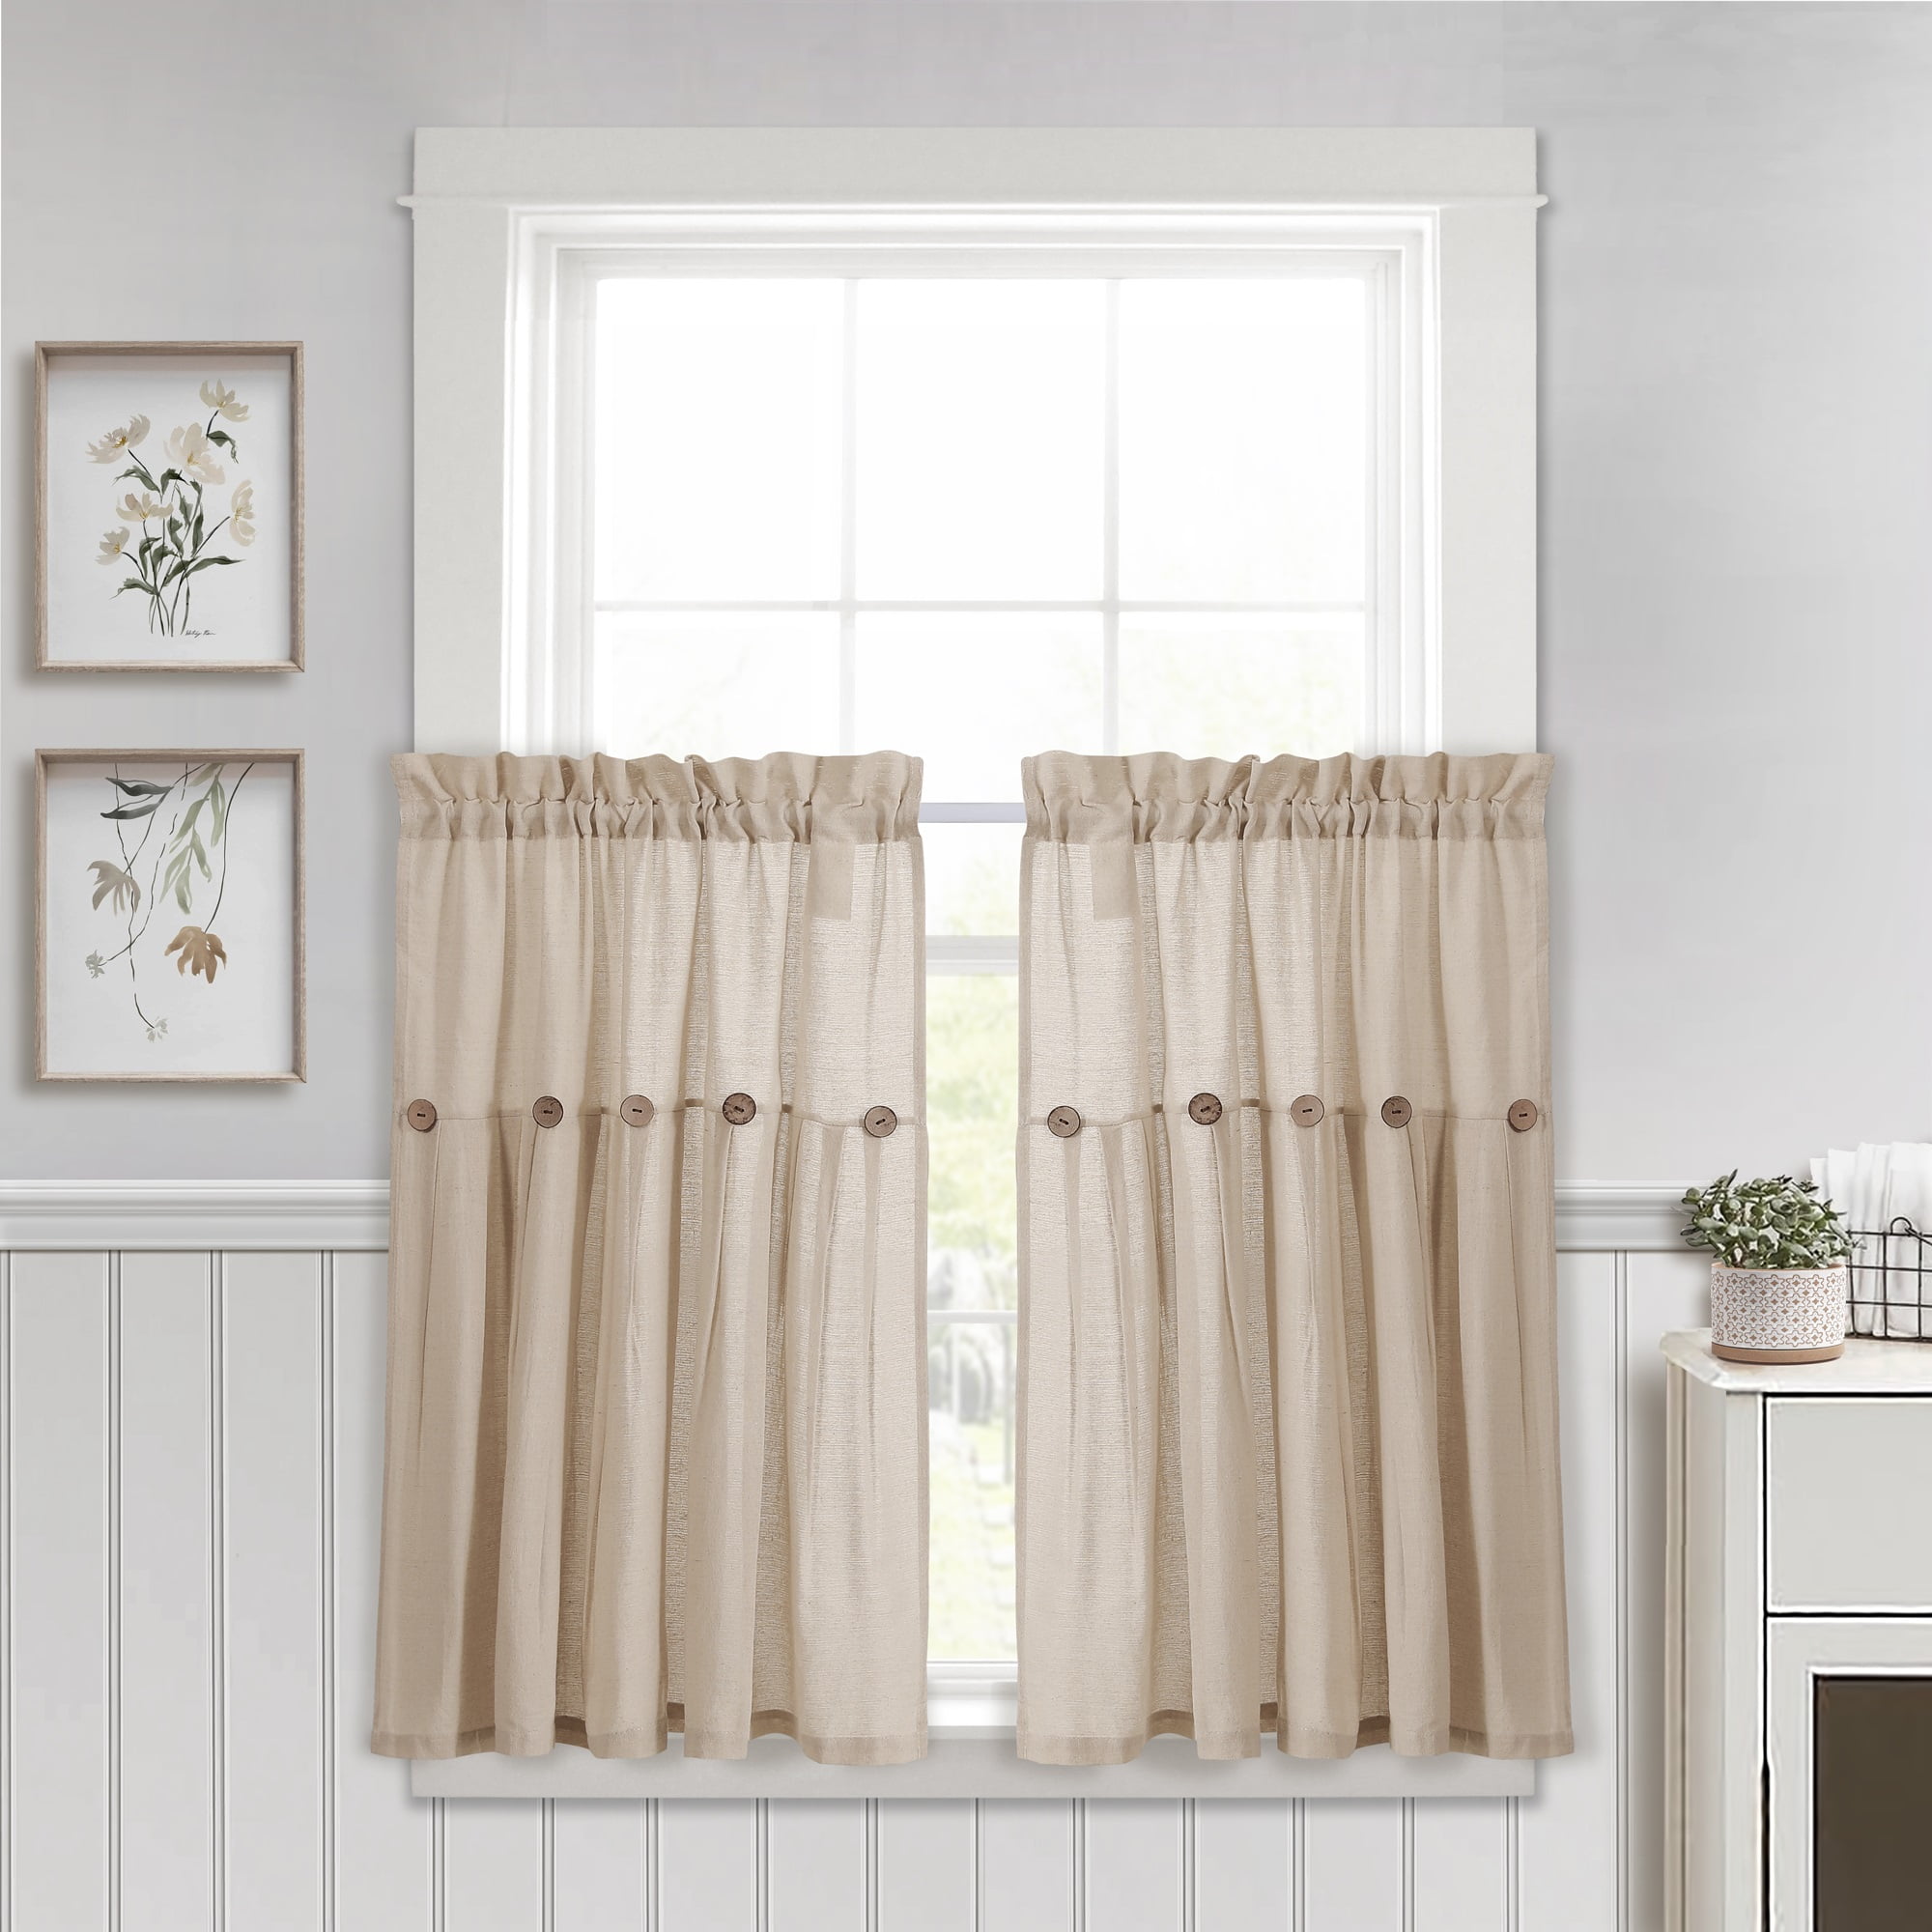 100% Cotton-Scalloped-3 Available Details about   Country Curtains Lined Valance 